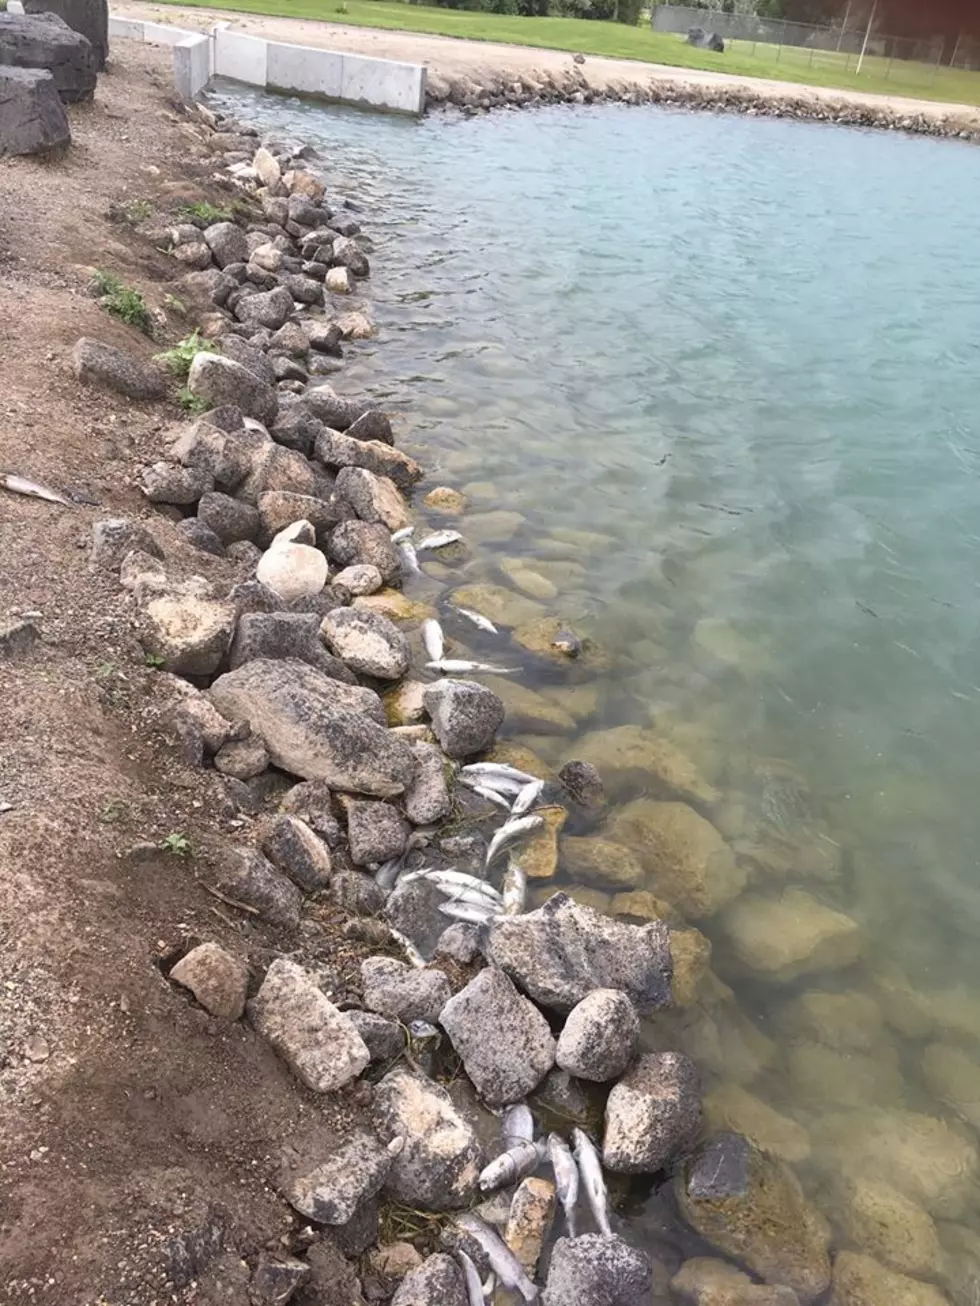 Idaho Fish and Game Investigating Die-off of Fish at Burley Pond